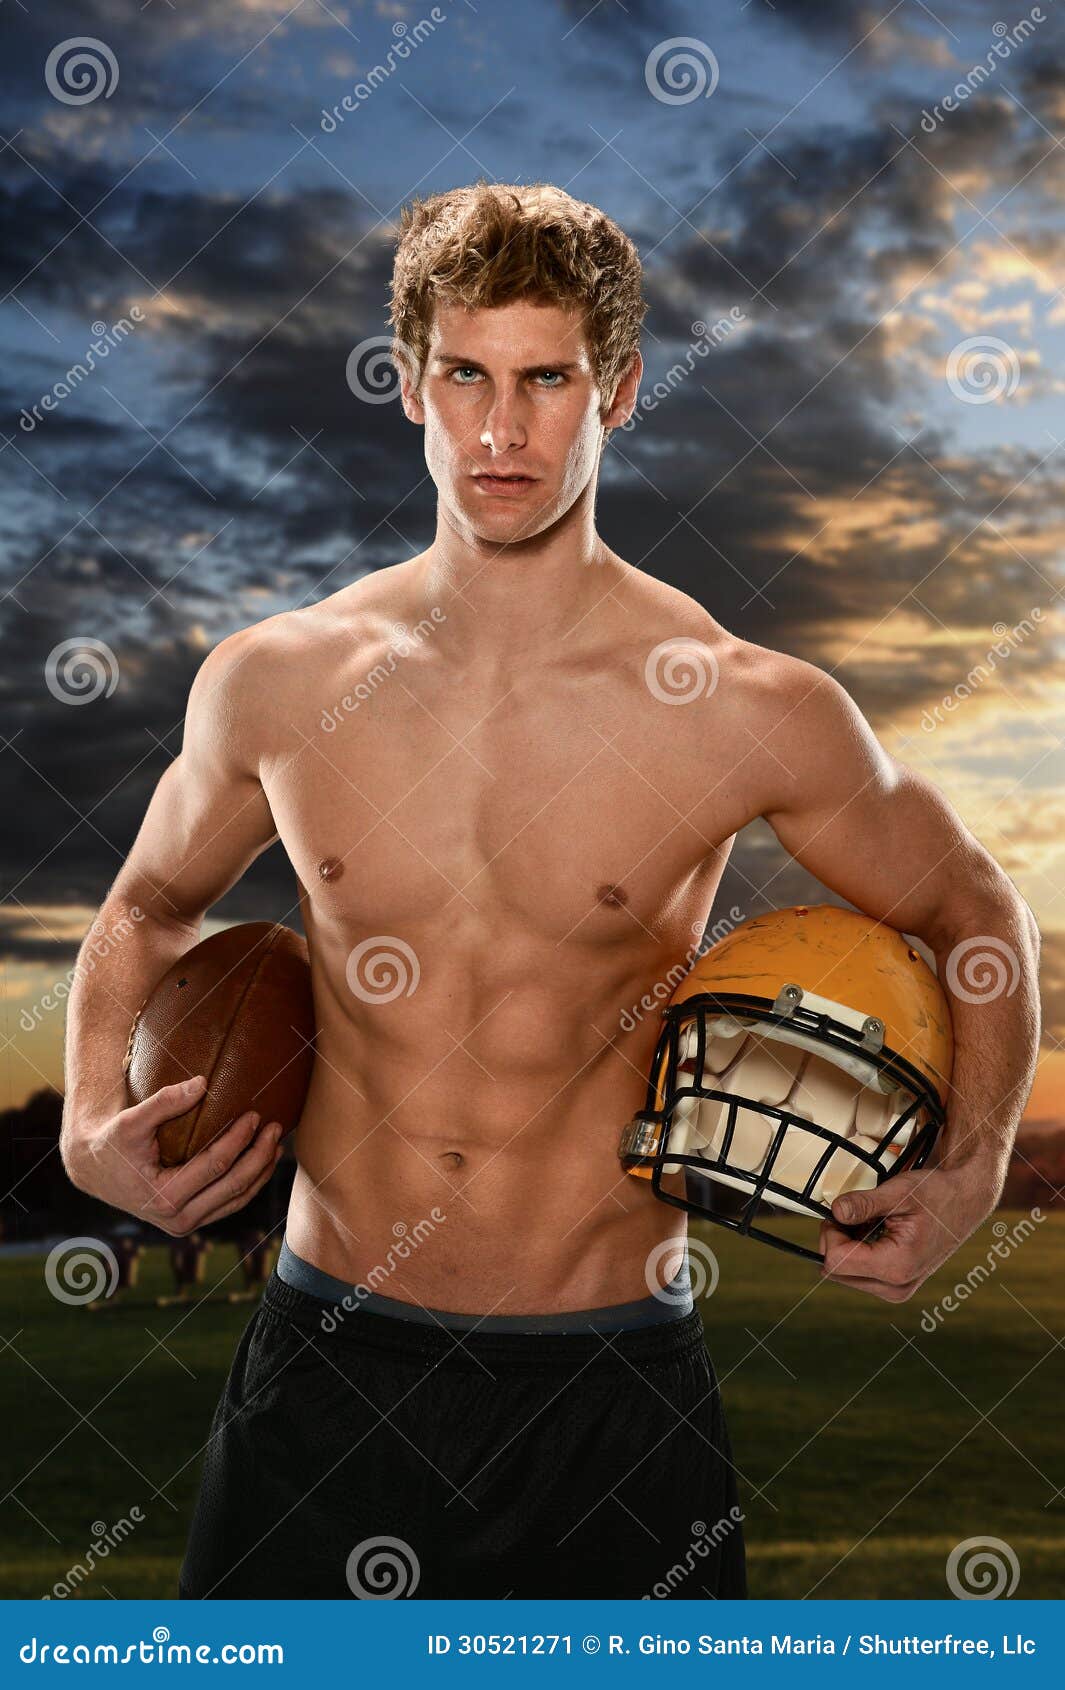 Young Man Holding Football And Helmet Stock Image - Image: 30521271